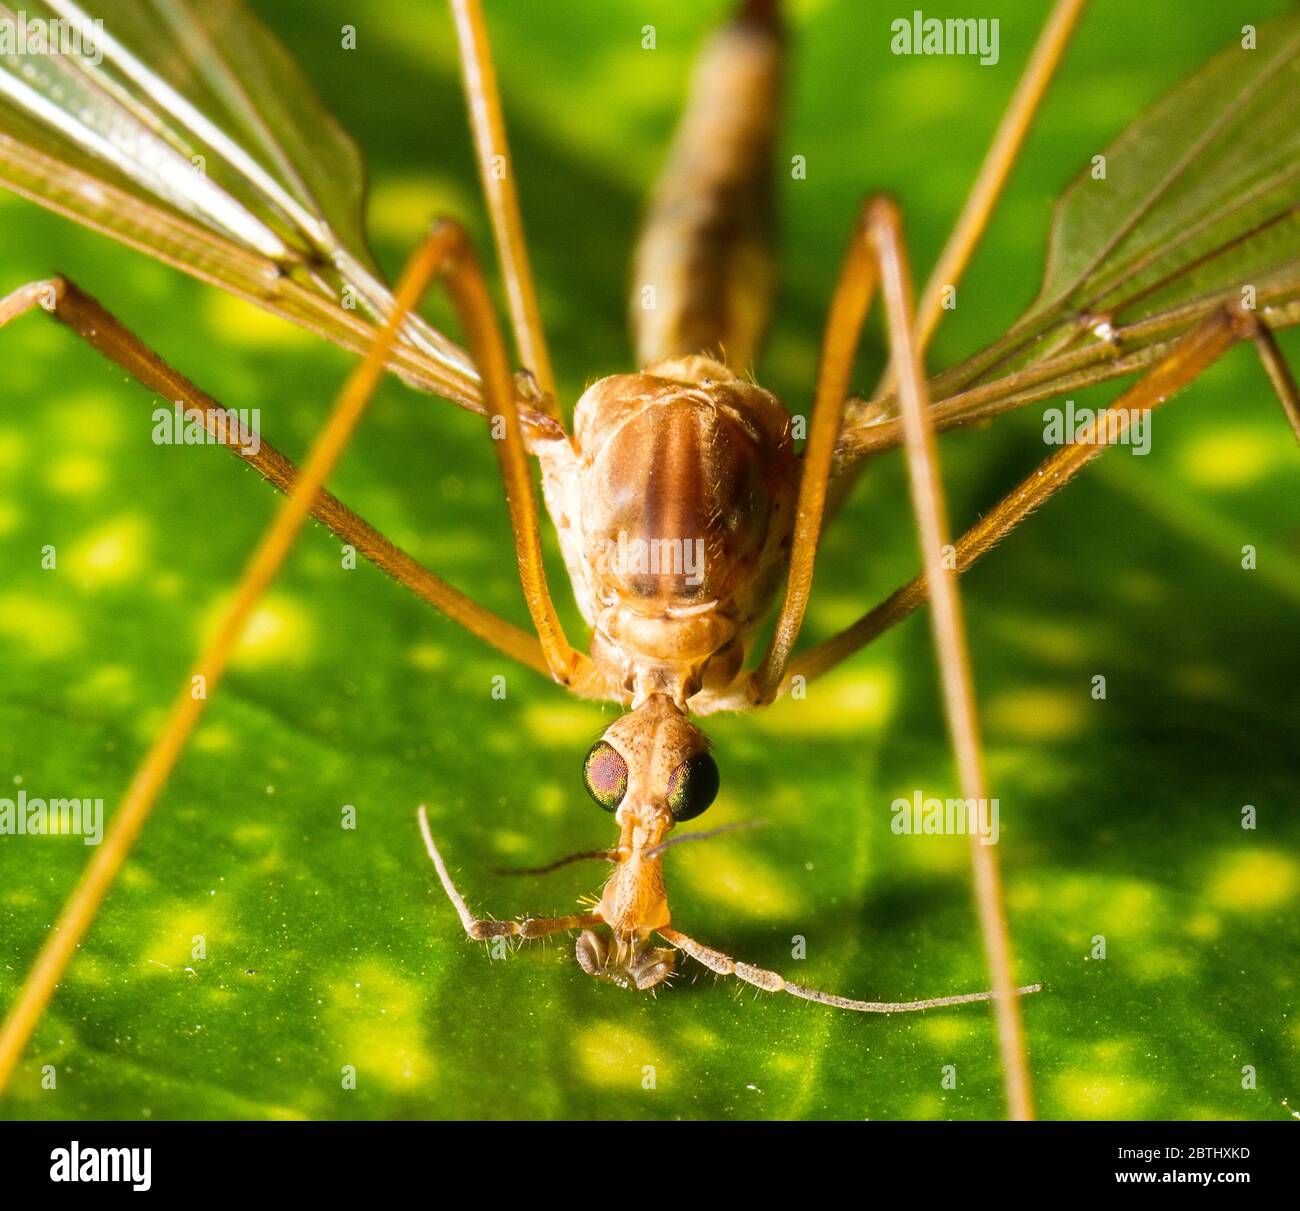 Crane fly close up macro, member of the insect family Tipulidae Stock Photo